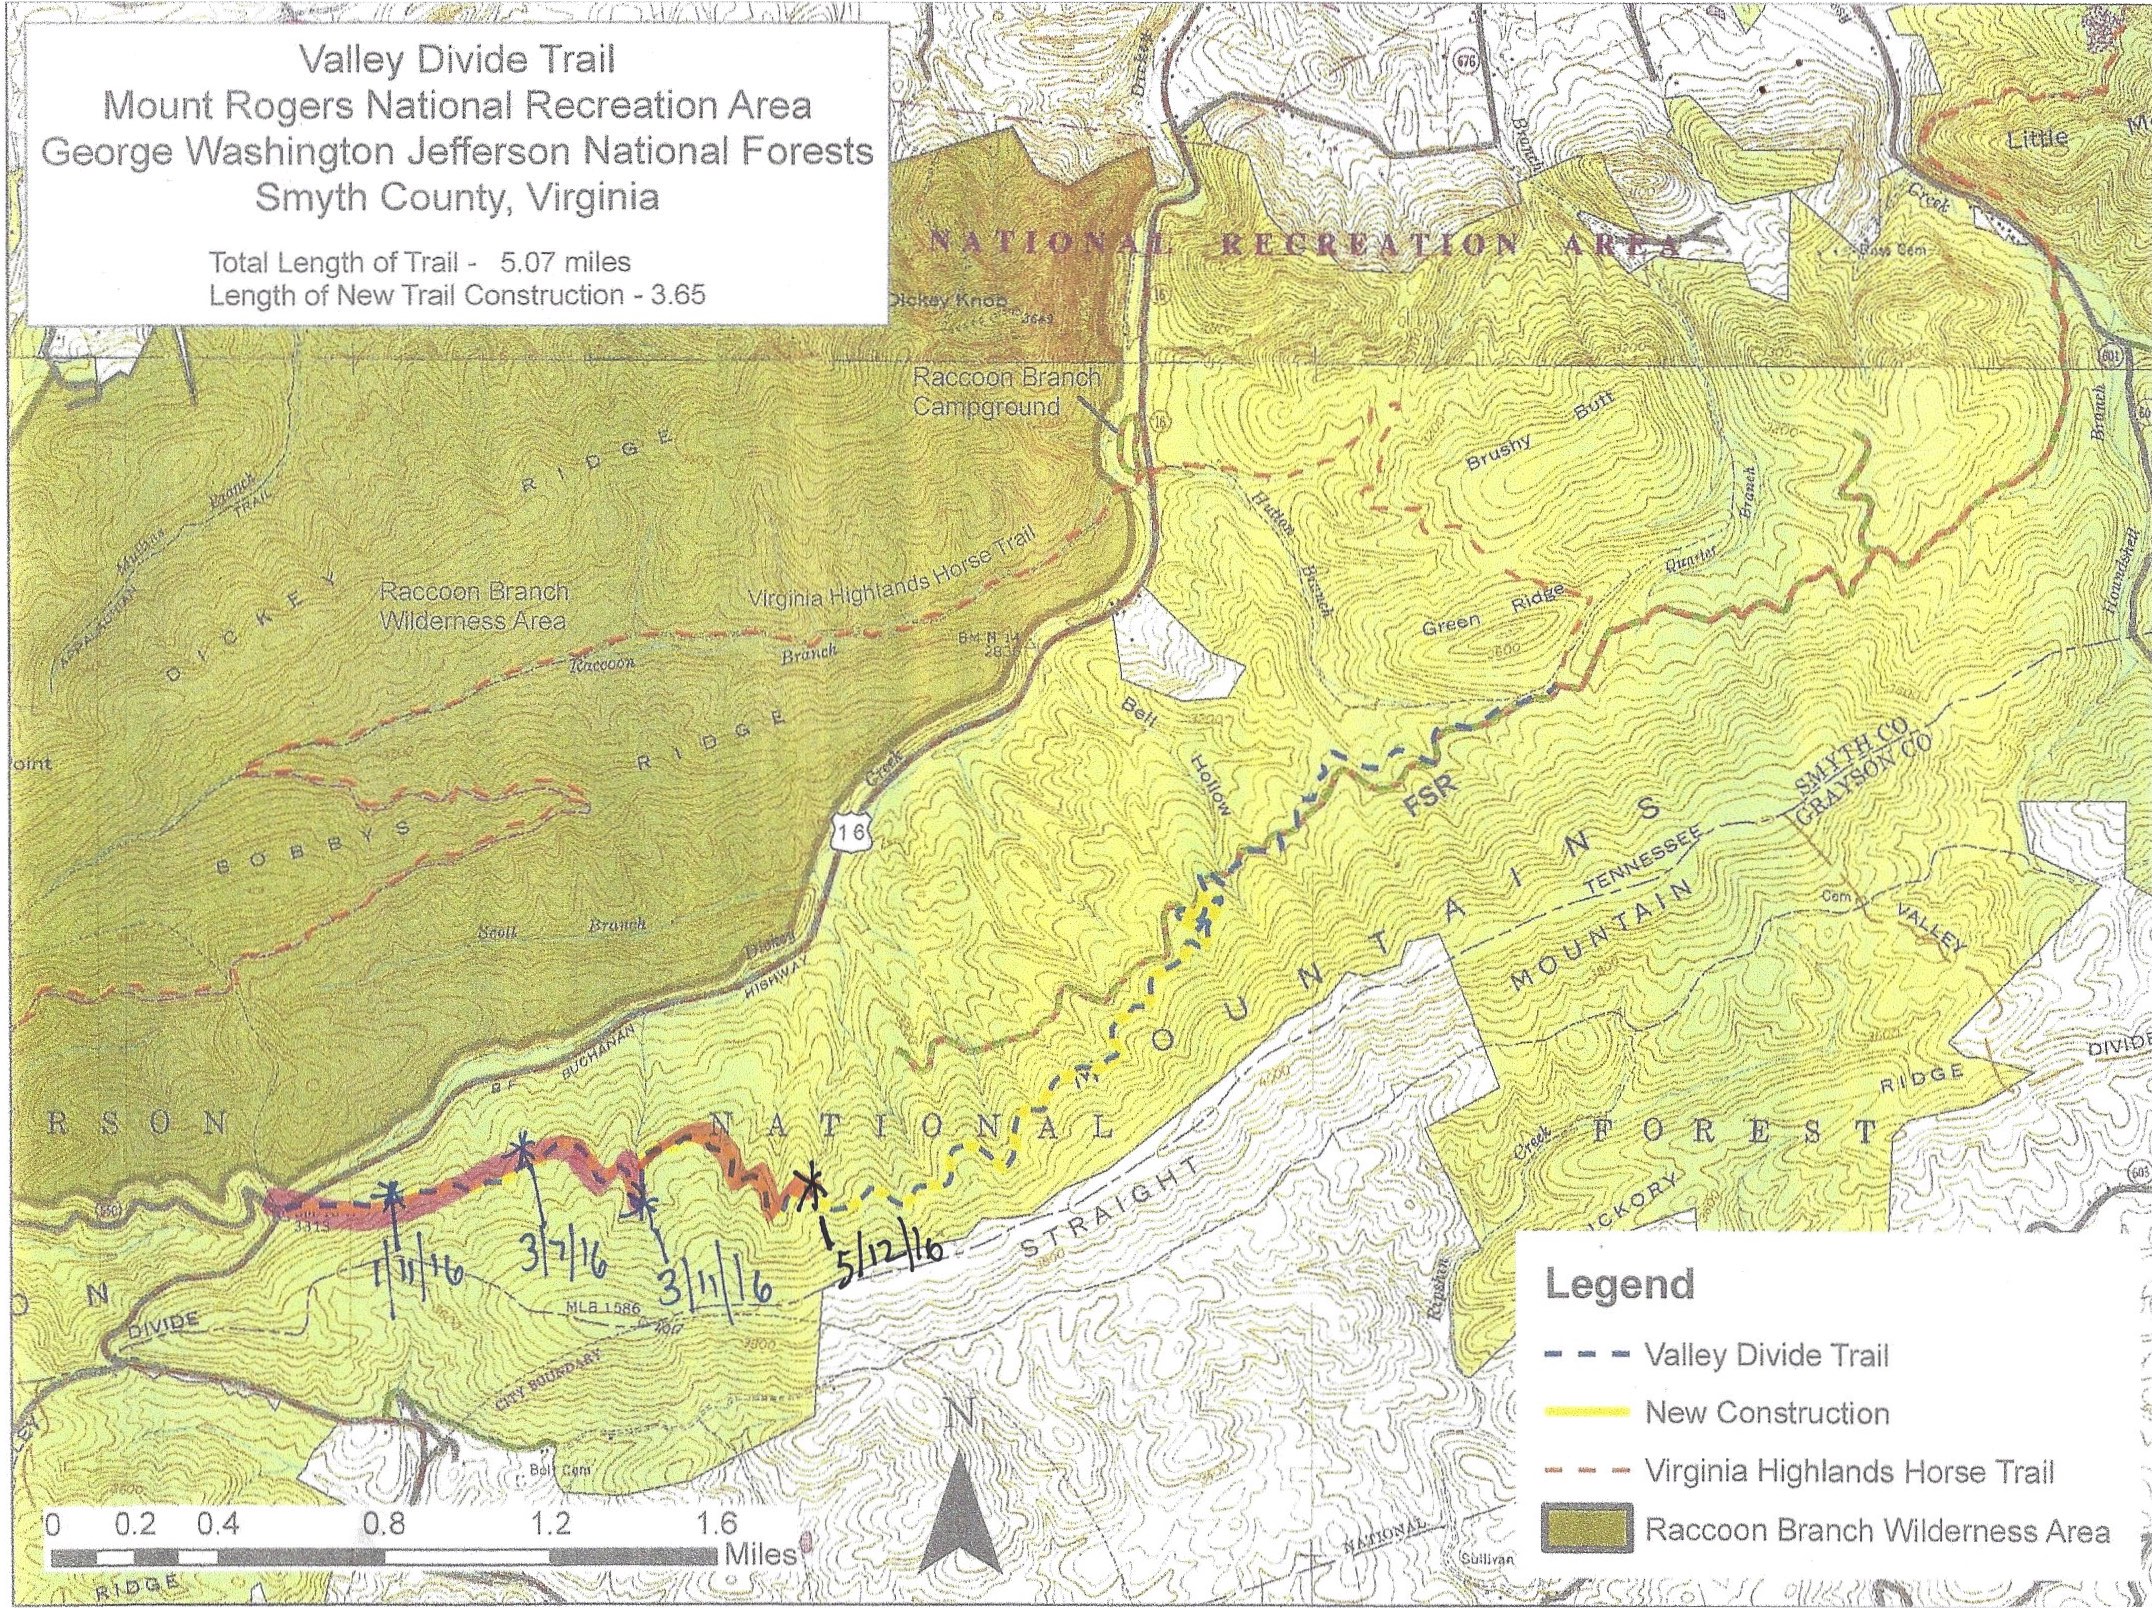 Our progress working on the proposed Valley Divide Trail